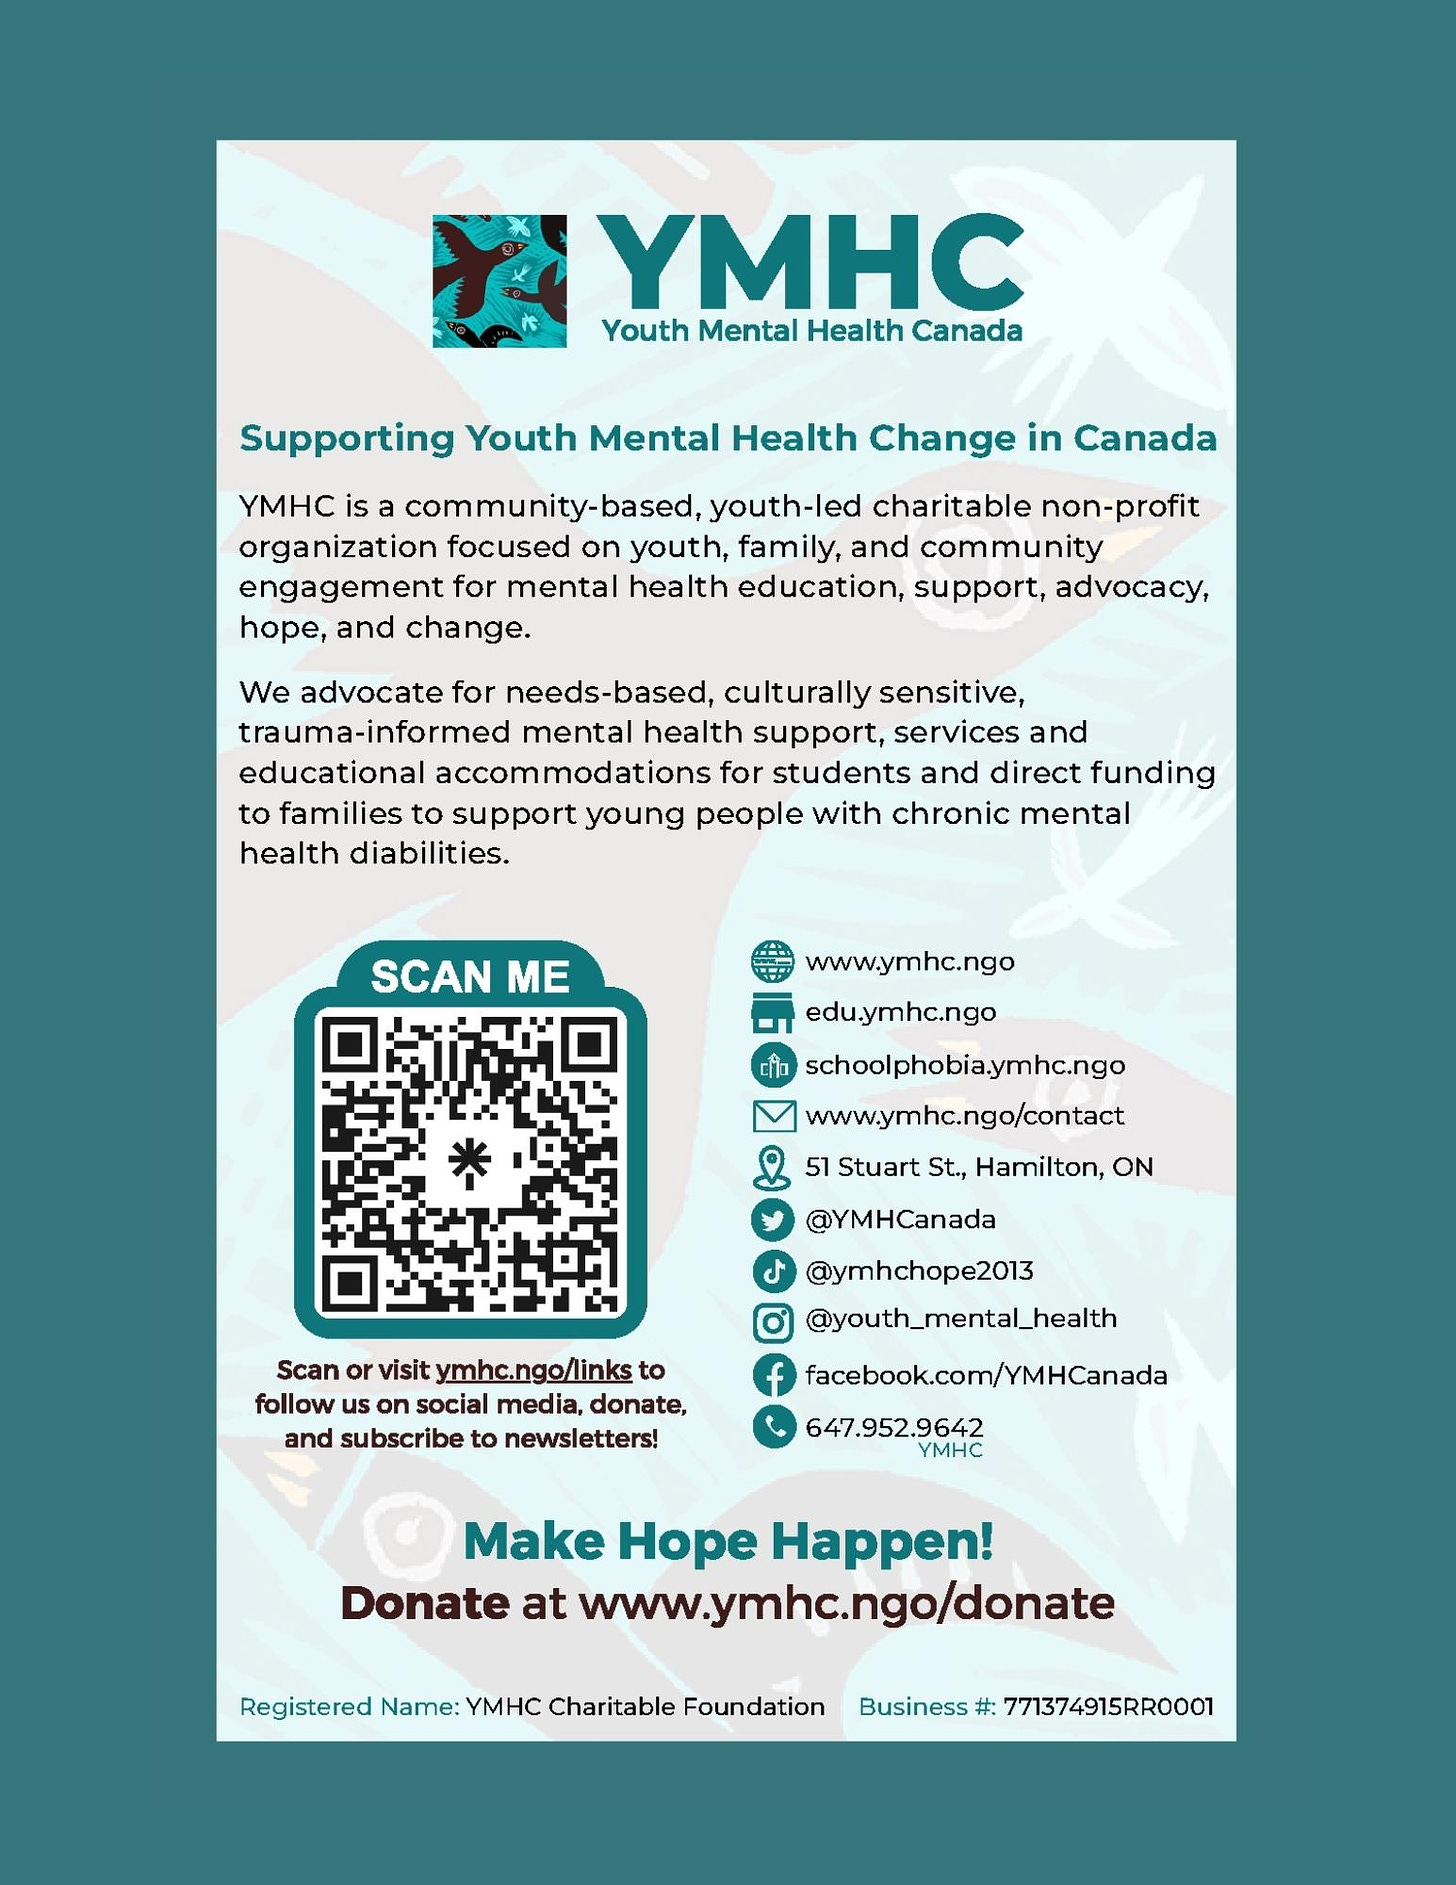 Supporting Youth Mental Health Change in Canada YMHC is a community-based, youth-led charitable non-profit organization focused on youth, family, and community engagement for mental health education, support, advocacy, hope, and change. We advocate for needs-based, culturally sensitive, trauma-informed mental health support, services and educational accommodations for students and direct funding to families to support young people with chronic mental health diabilities. S